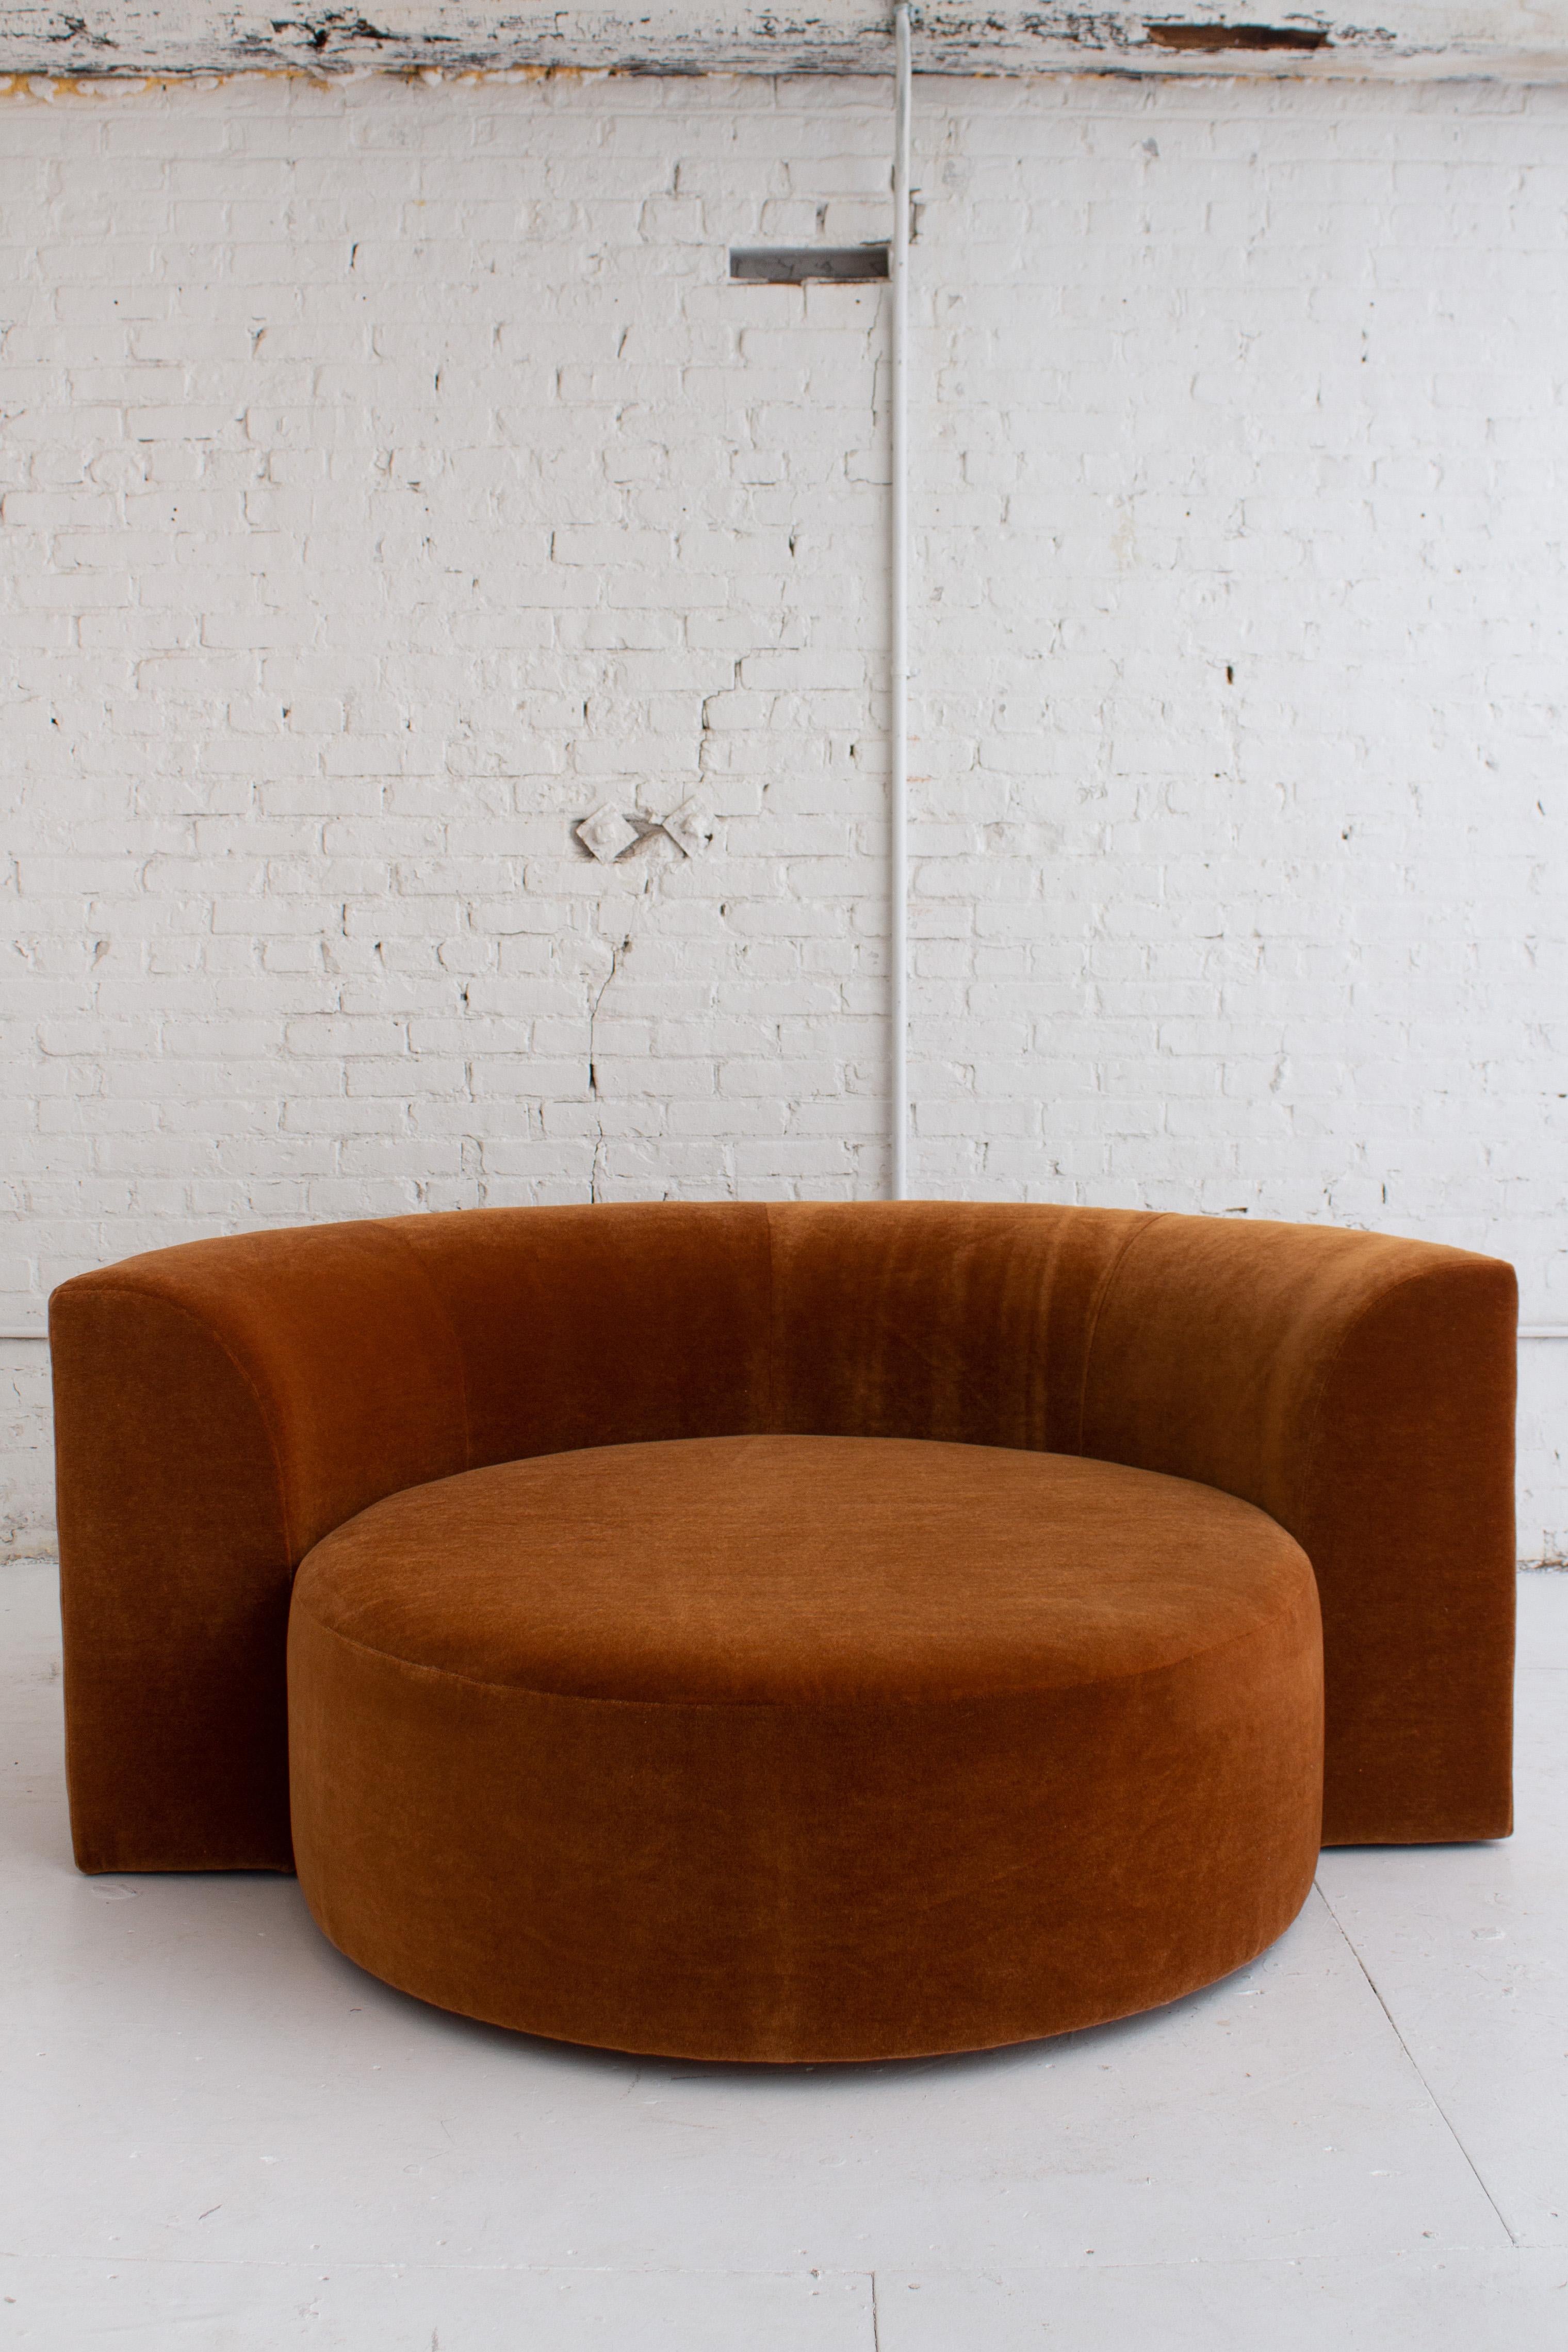 Canadian Circular Chaise Lounge in Mohair by Roger Rougier